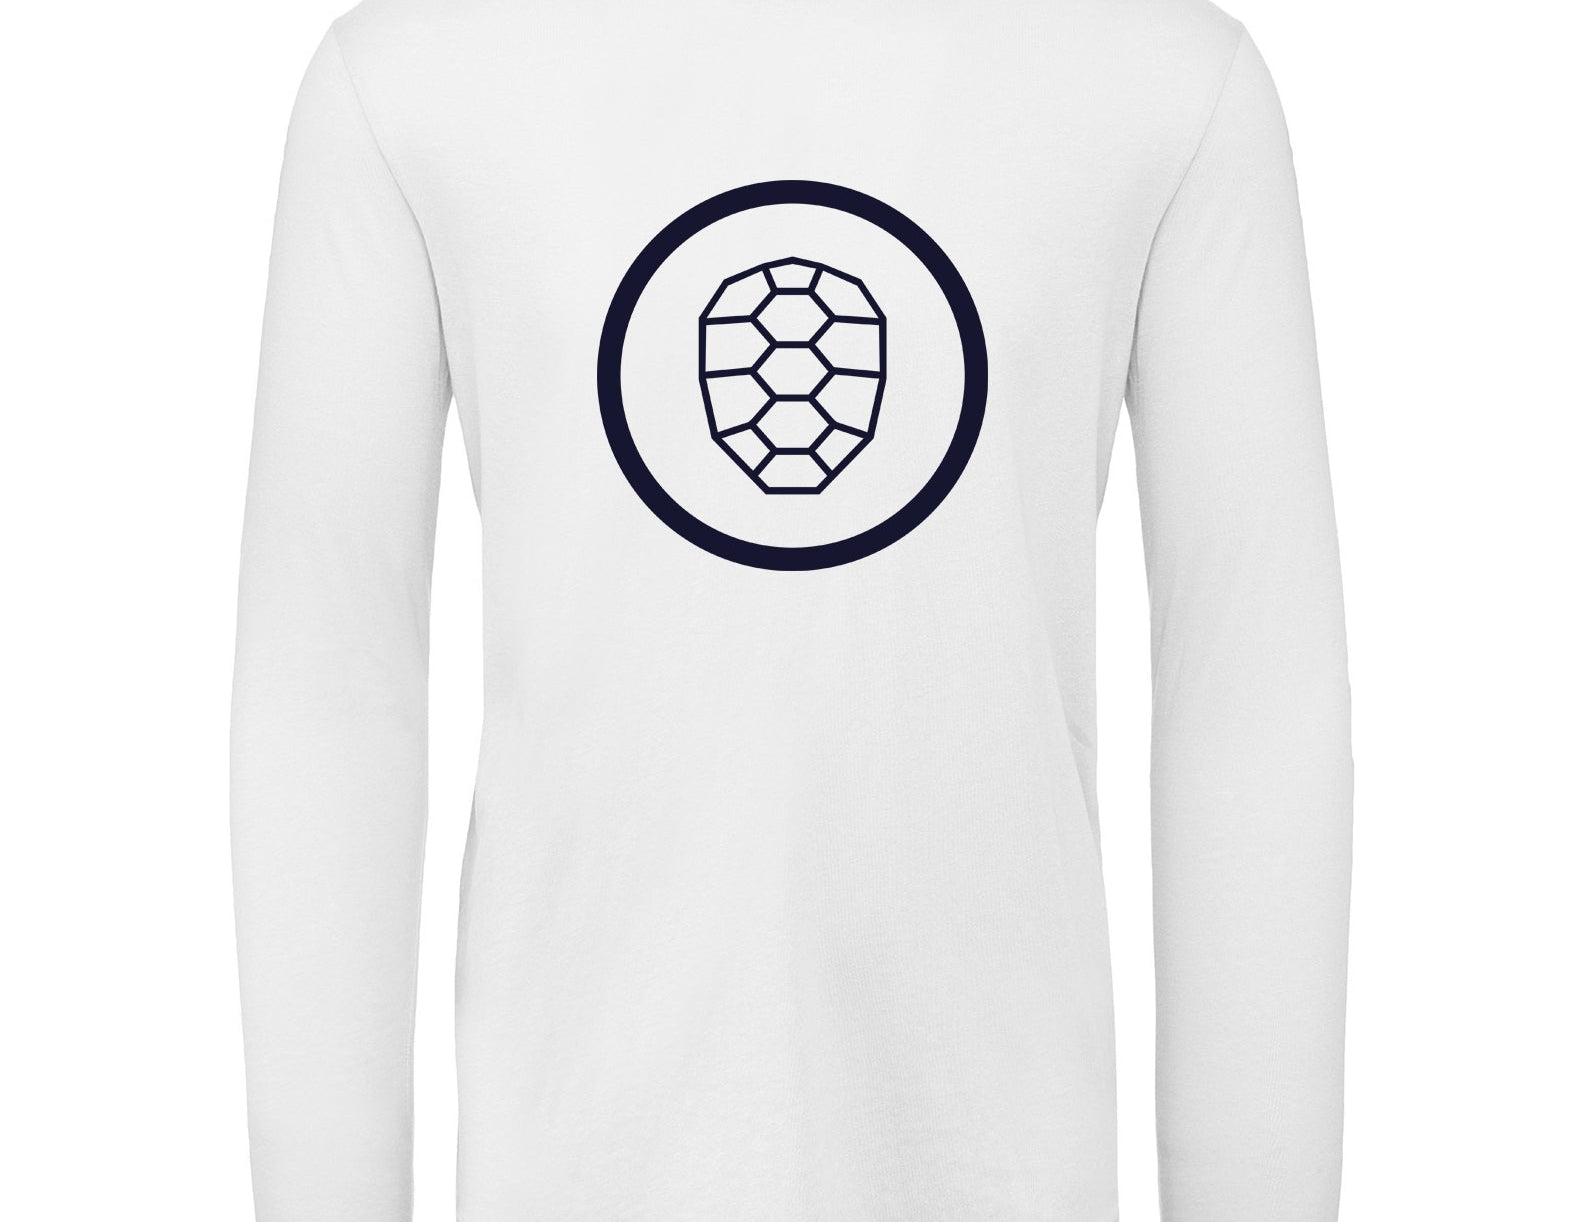 Long Sleeve T-shirt in White - ONETURTLE